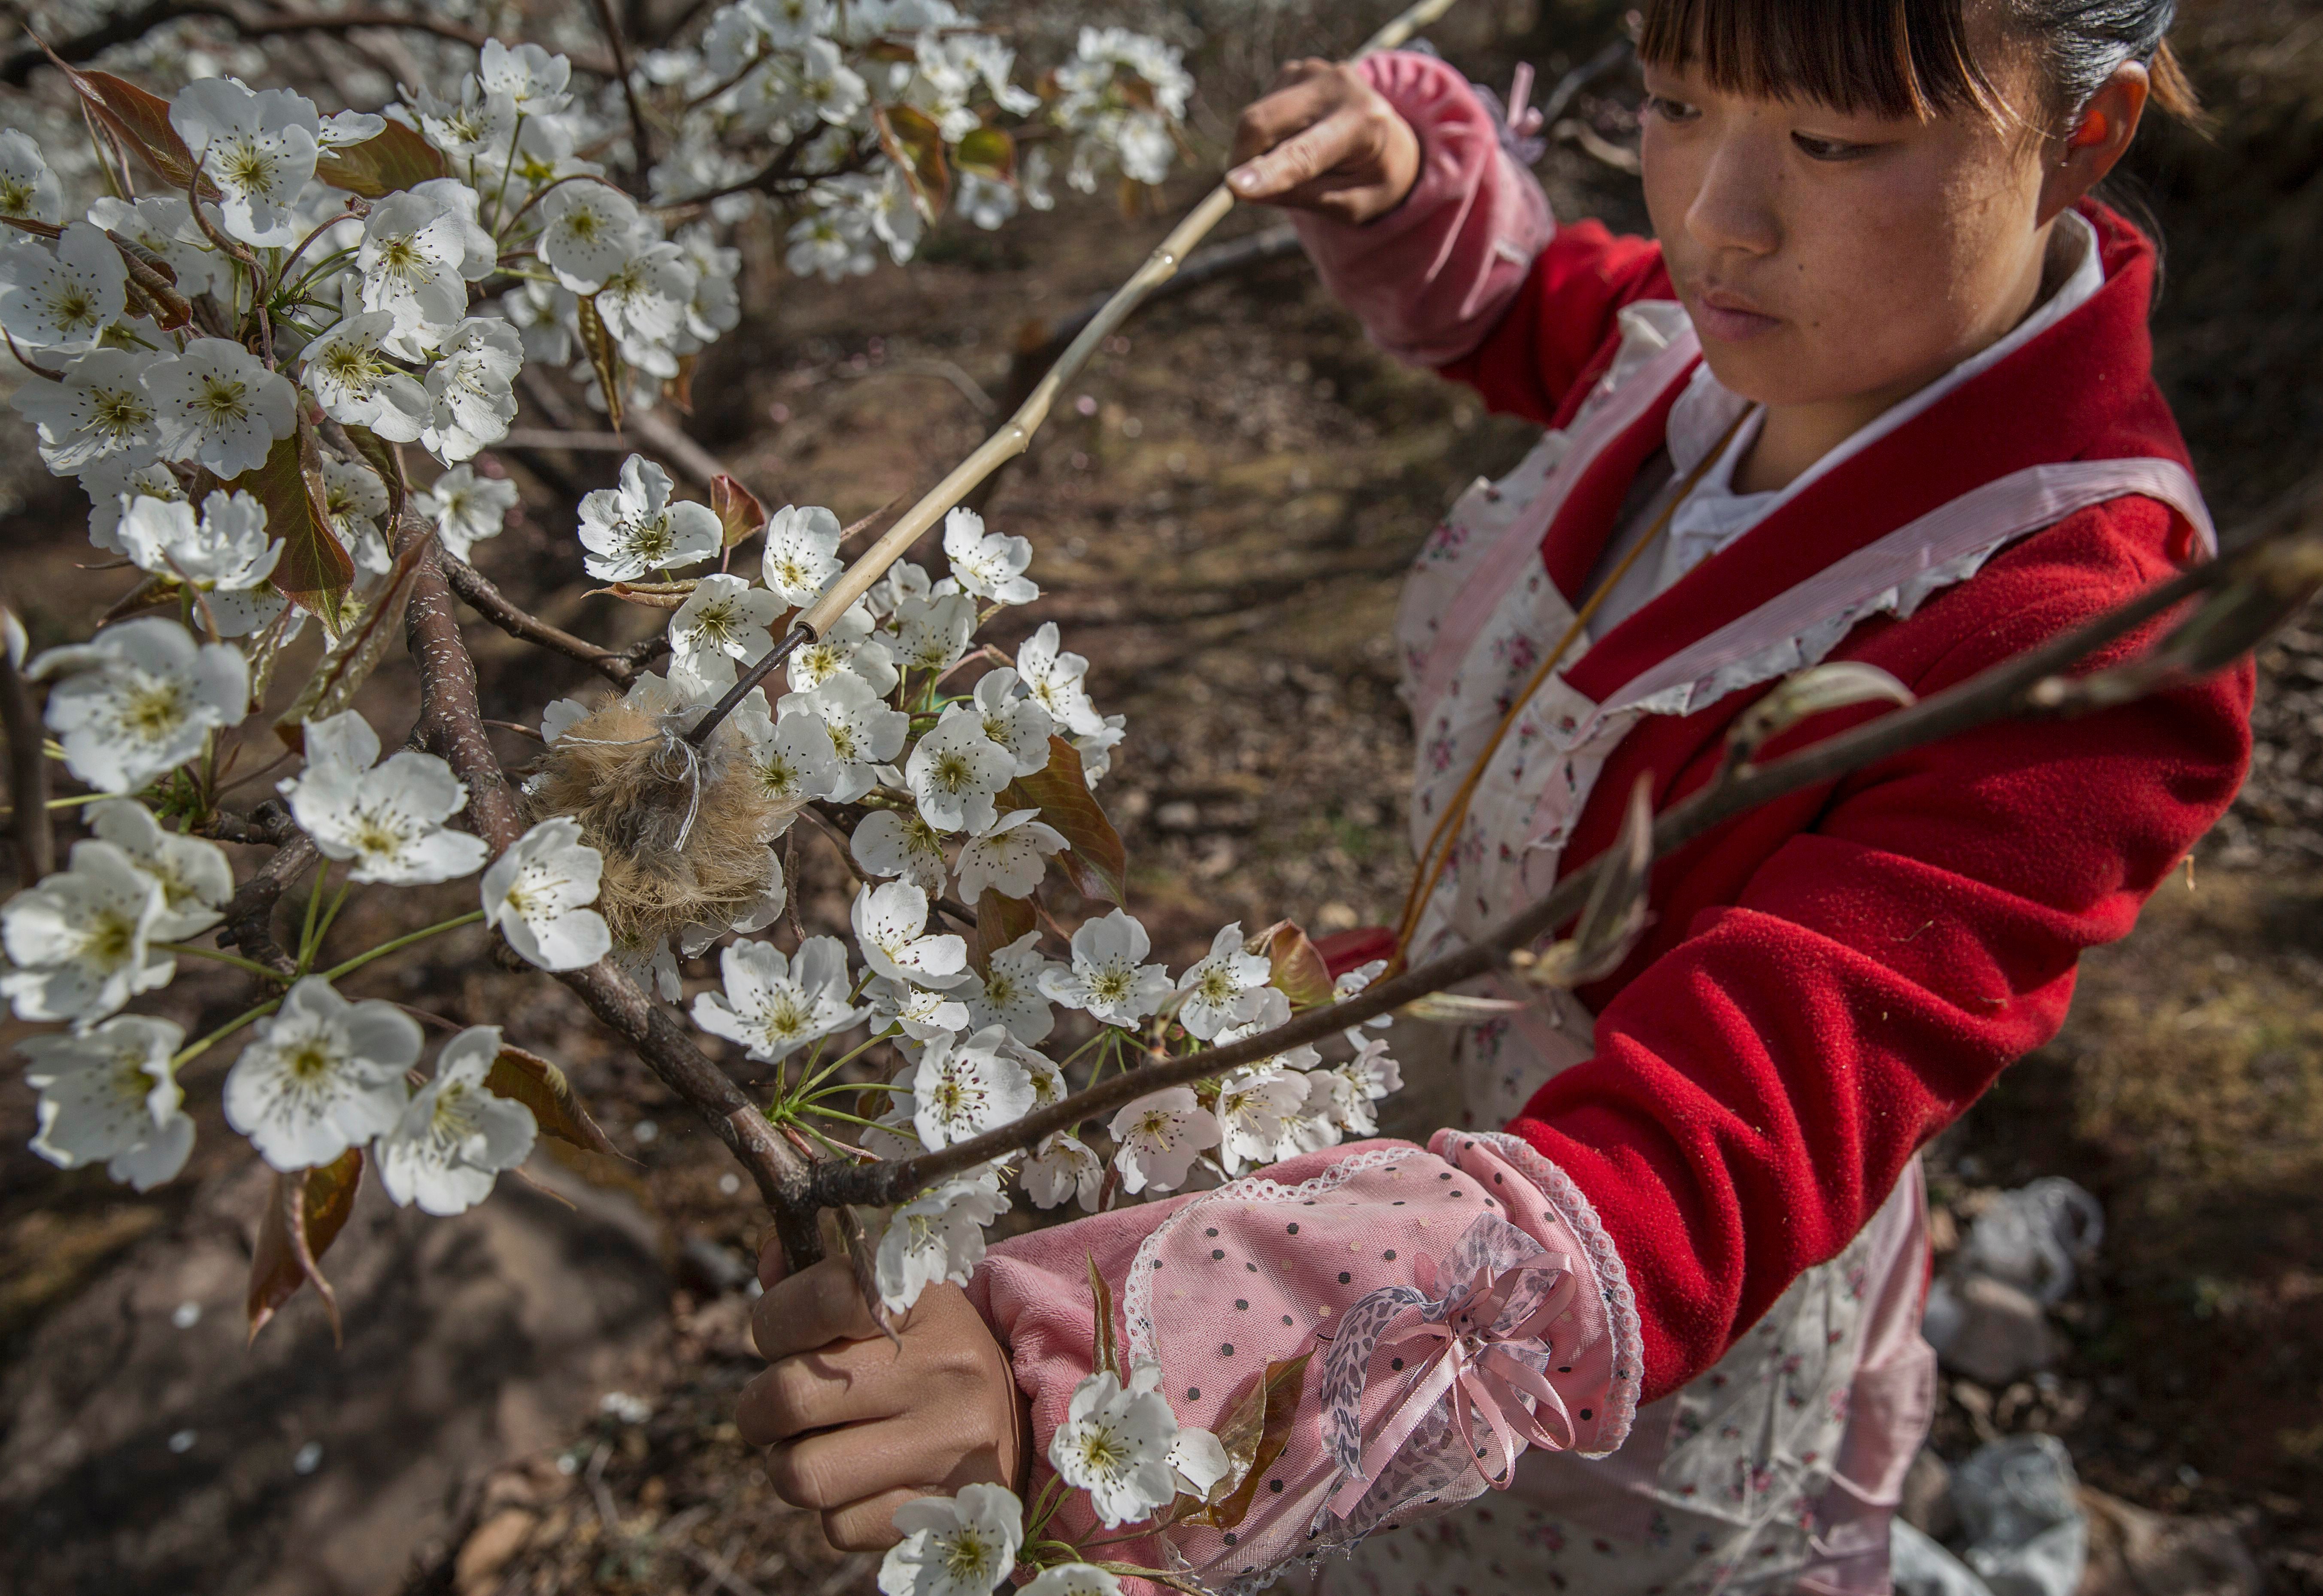 Pollinating a pear tree by hand in China